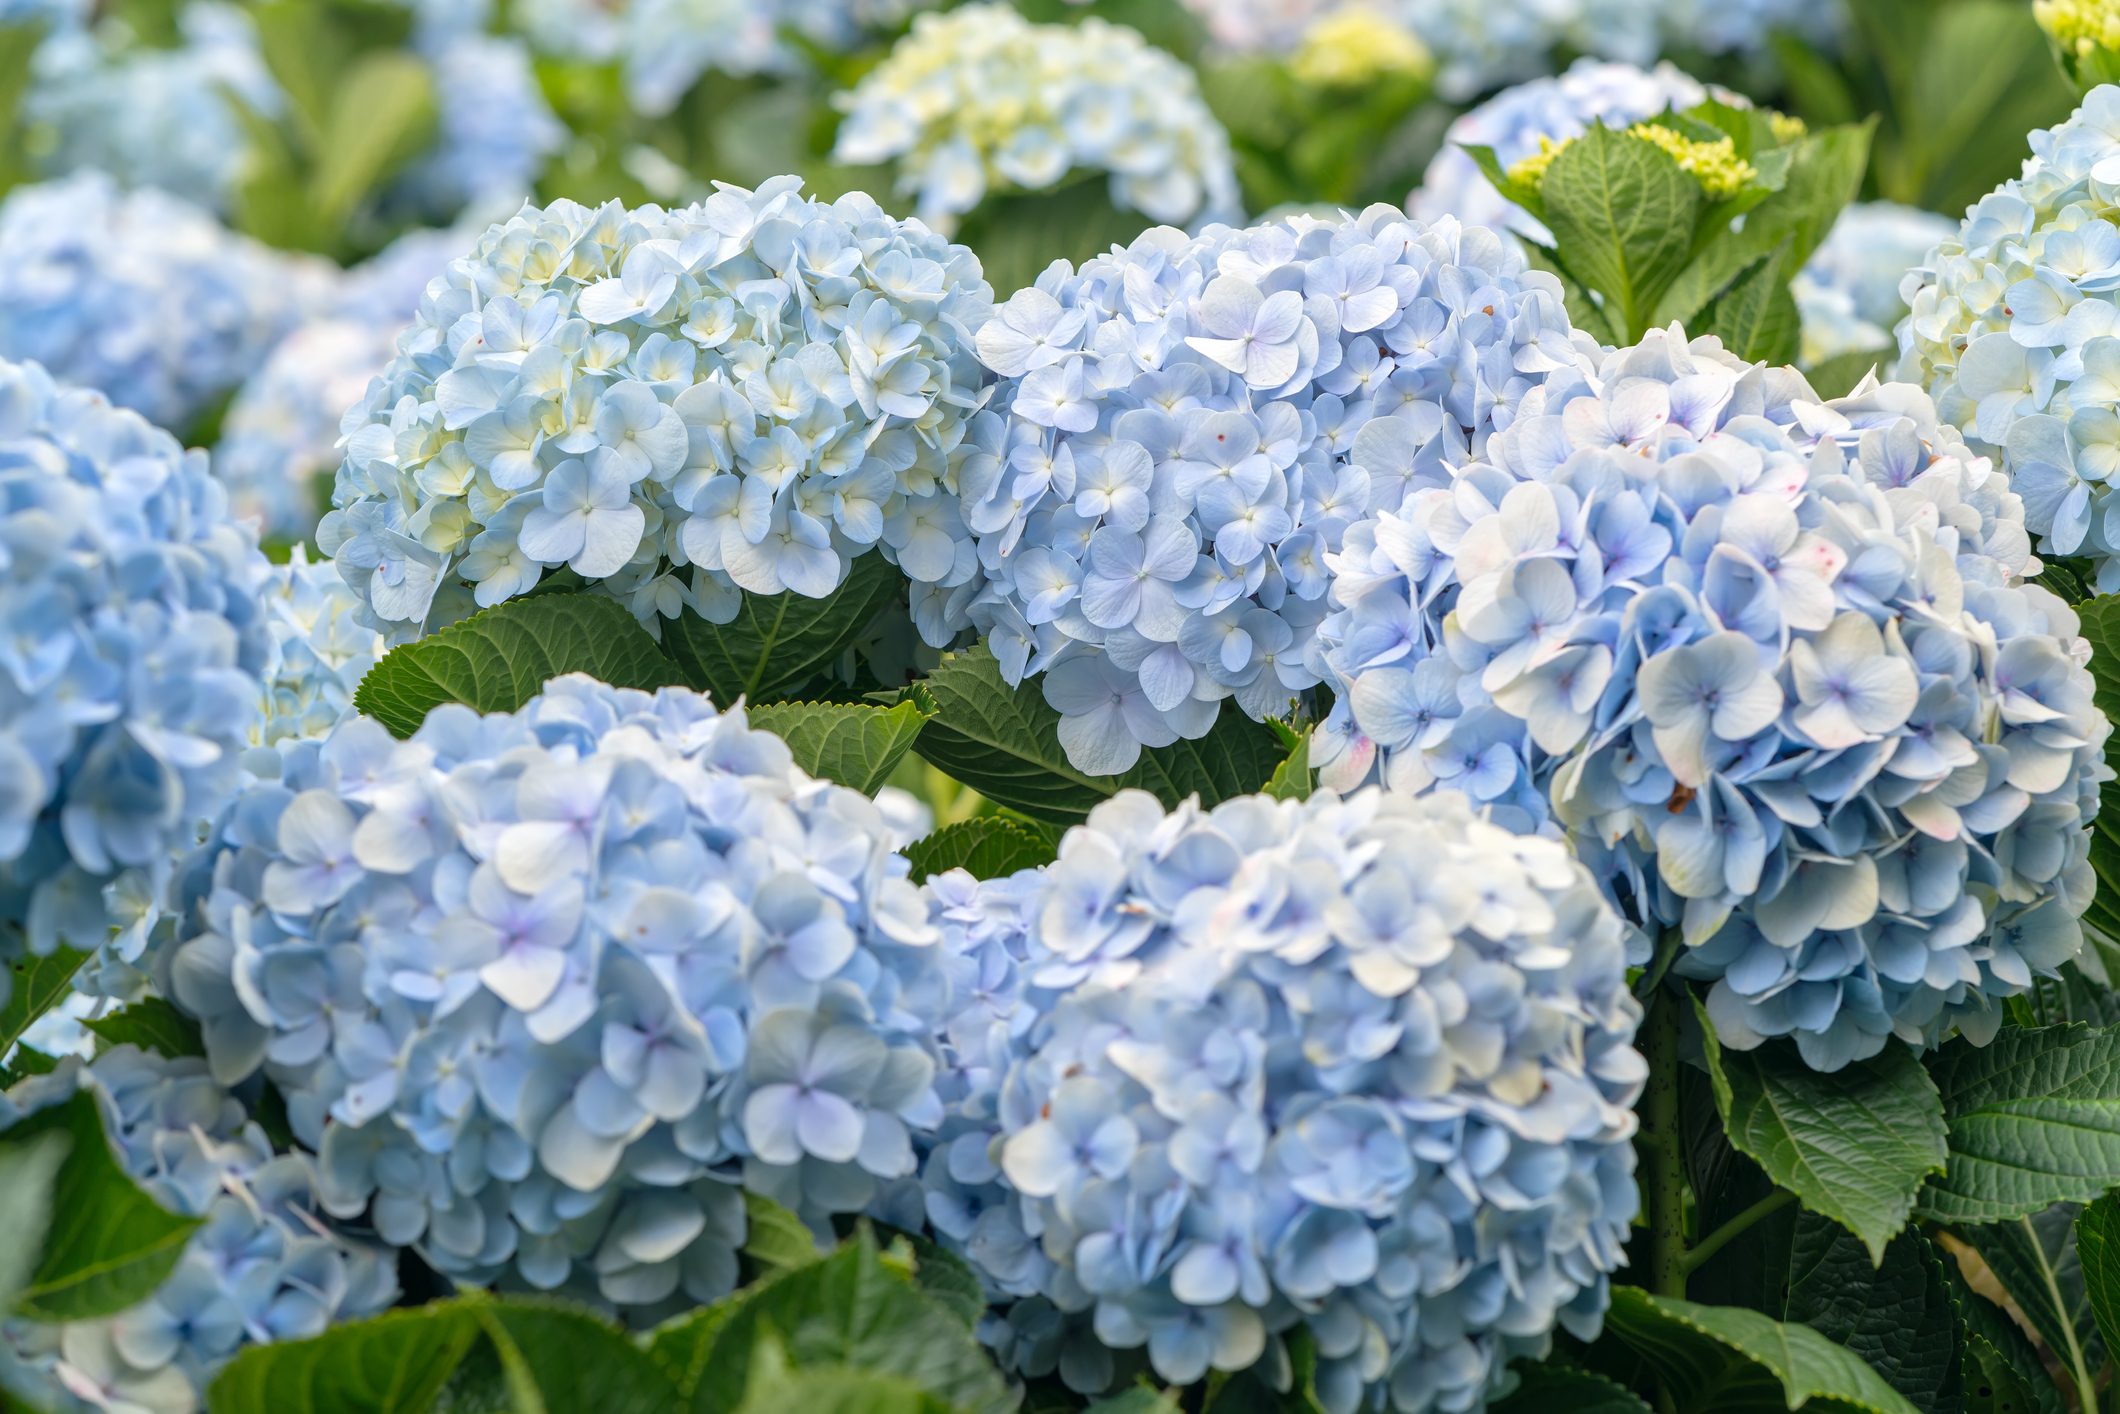 How to Dry Hydrangeasand Now's a Great Time for Those Late